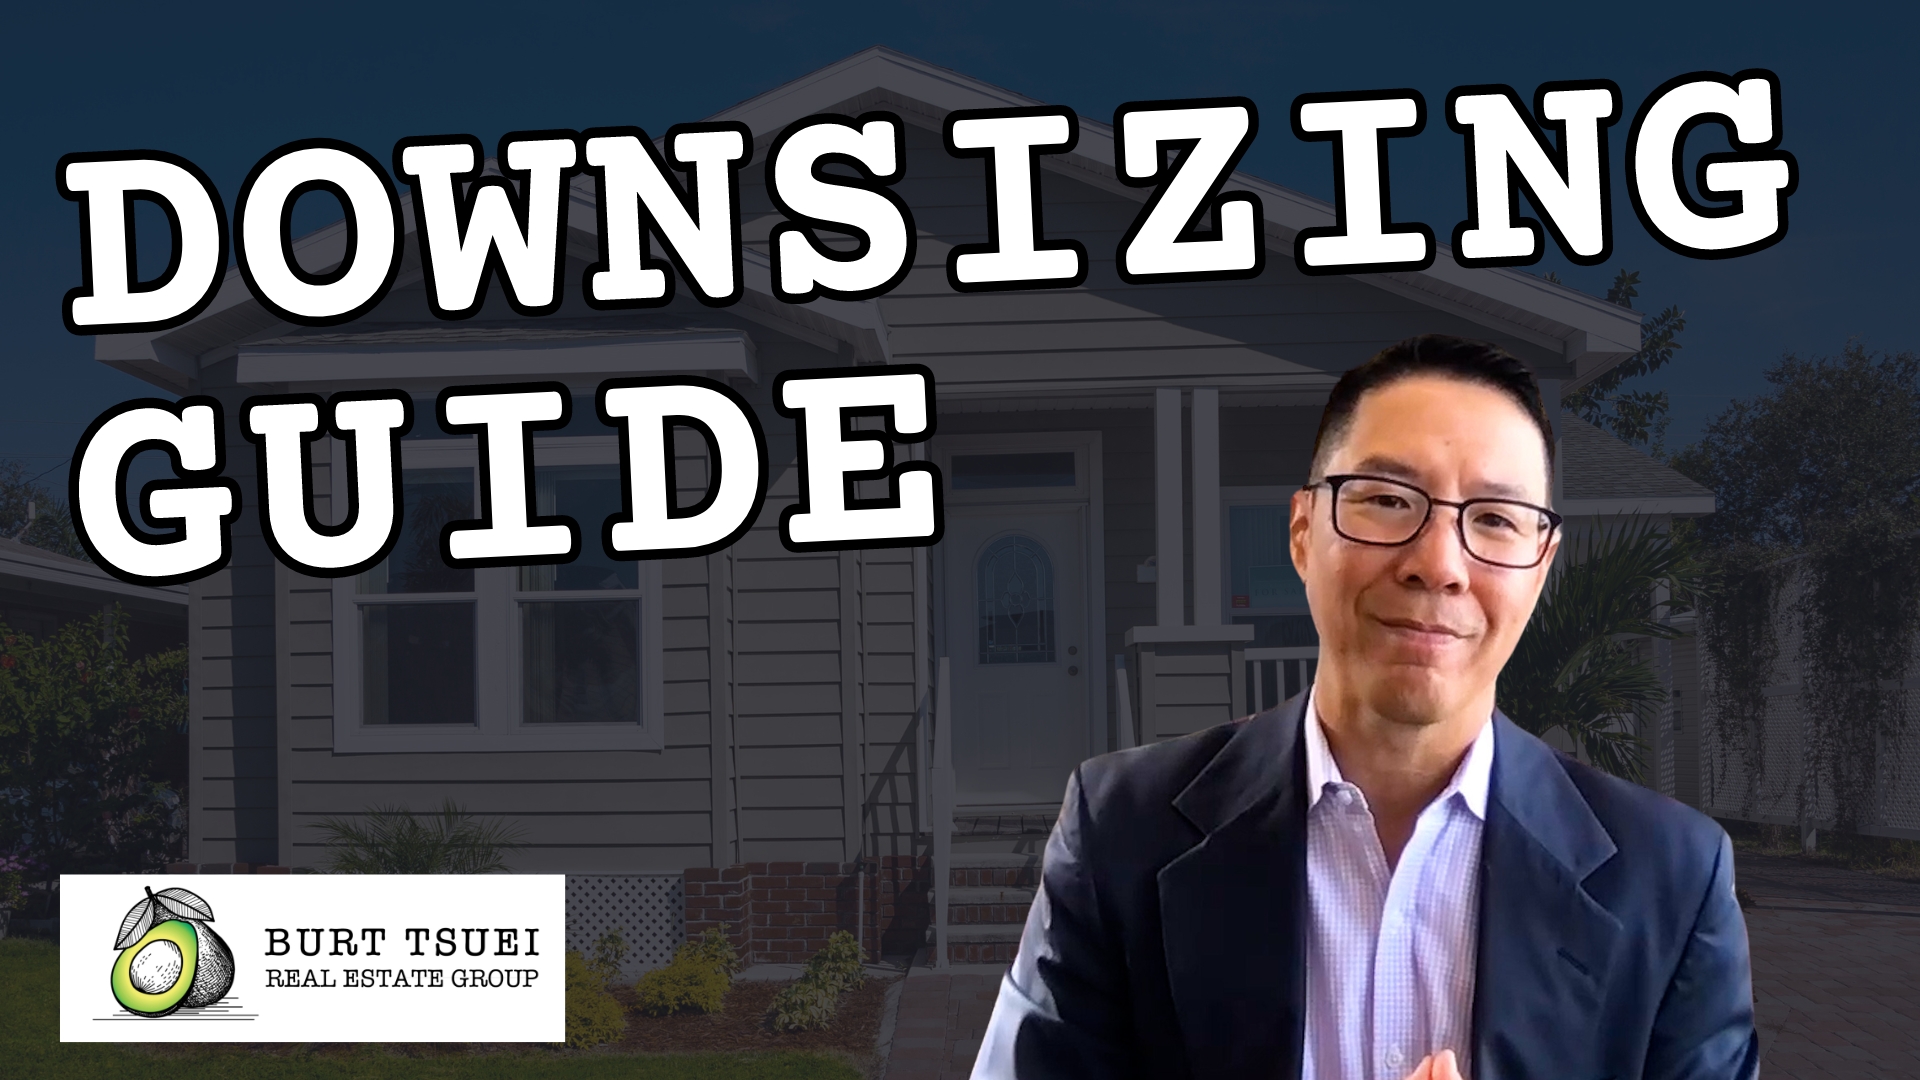 What to Do Before Downsizing